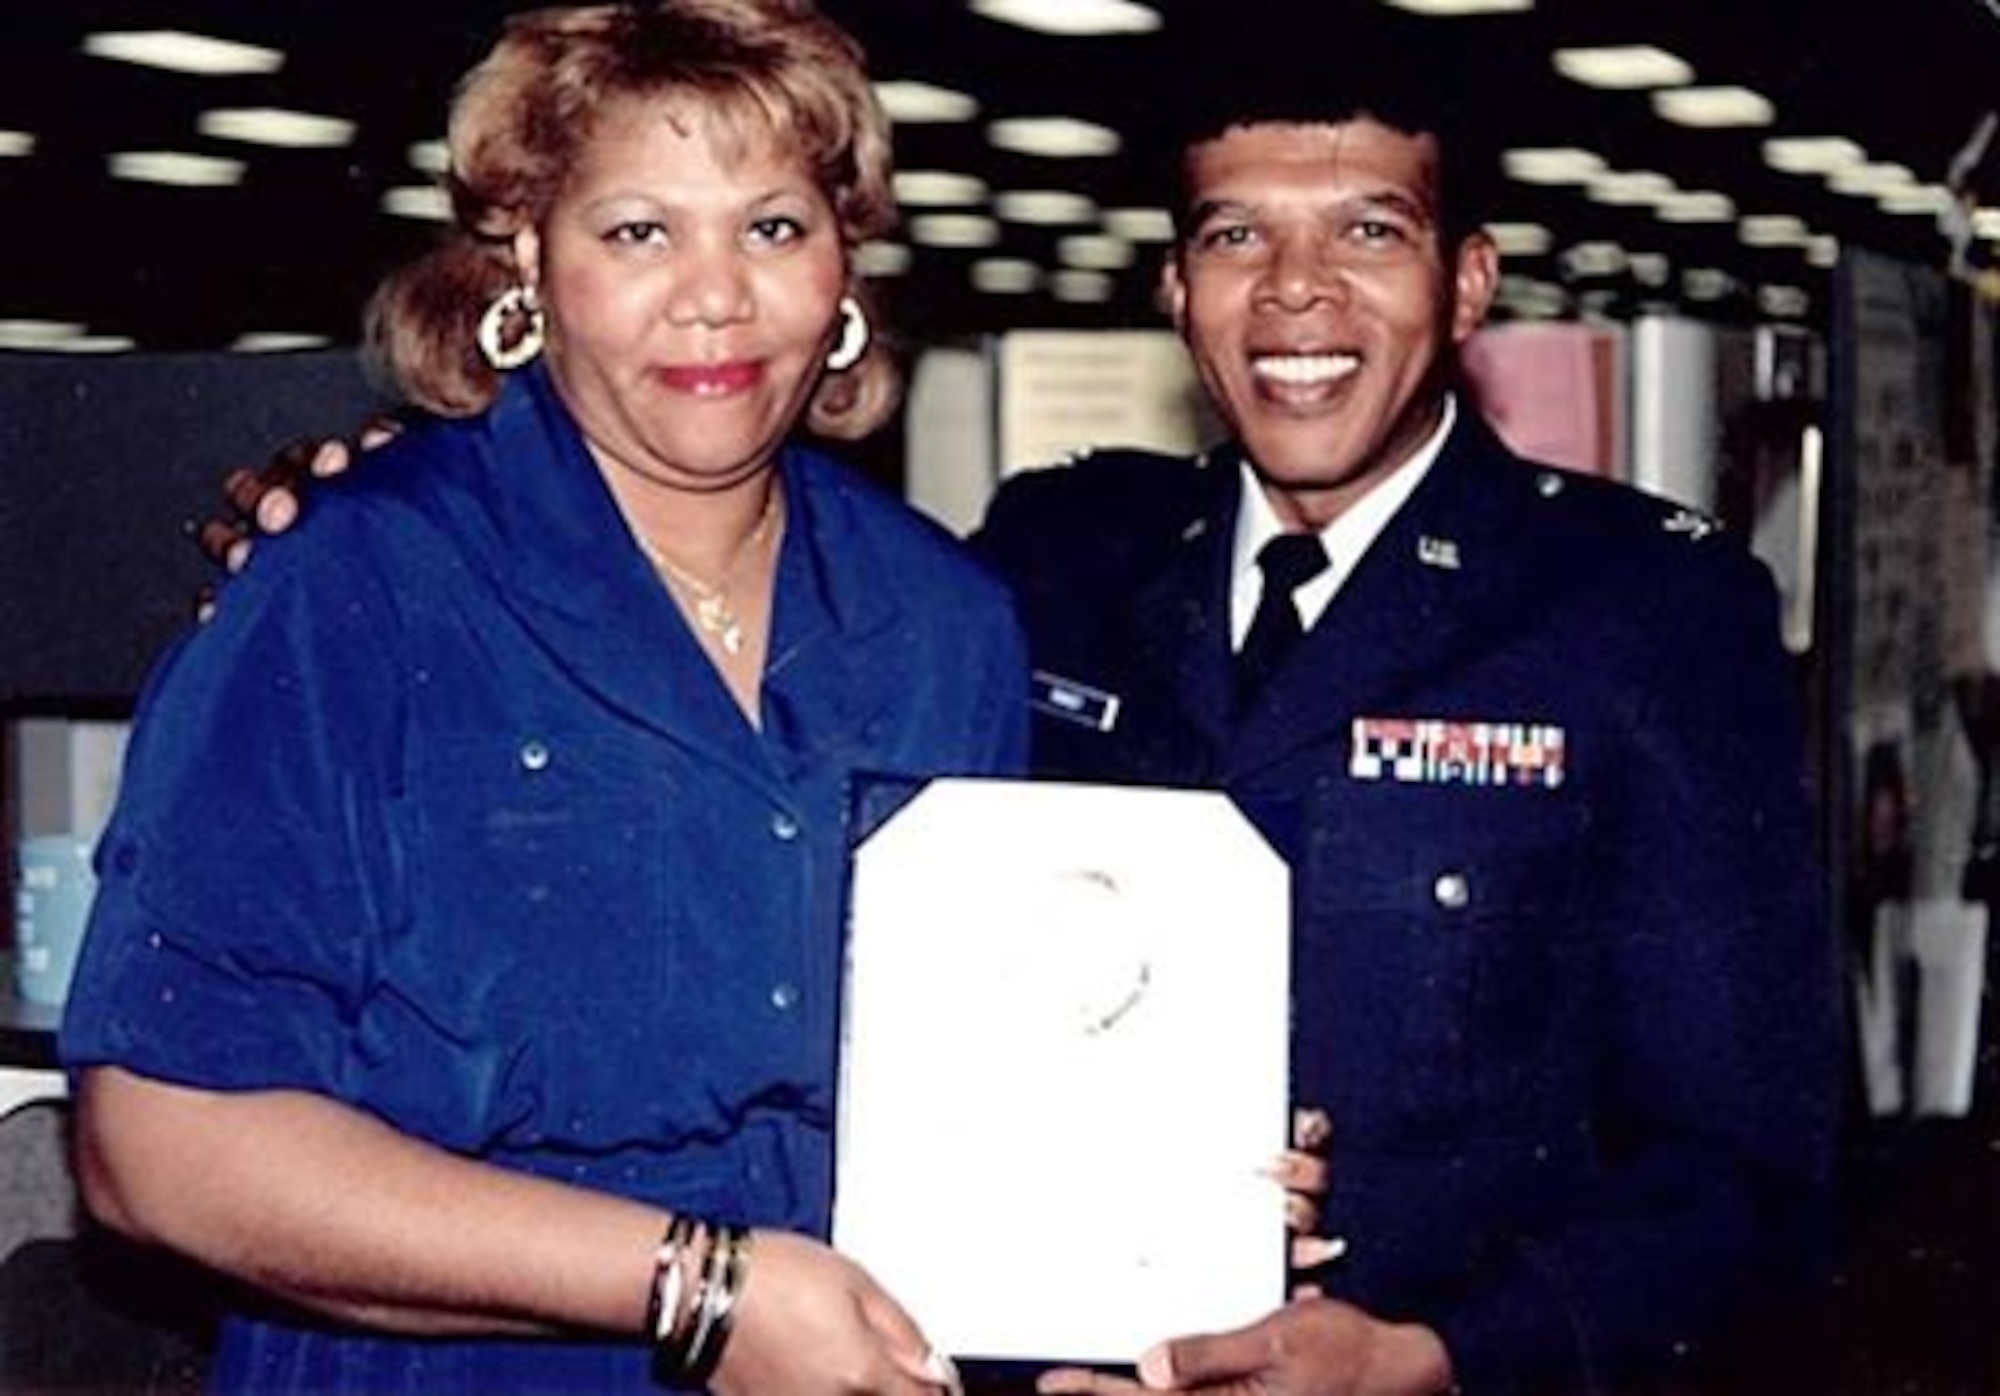 Col. Joseph C. Ramsey presents a certificate to Margaretta “Gretta” Burroughs in an undated photo. Ramsey was the first and only African-American commander at the Air Reserve Personnel Center when it was previously located at the former Lowry Air Force Base, Colorado. He served as the 21st ARPC commander from May 16, 1987 until Aug. 23, 1991. (U.S. Air Force courtesy photo)